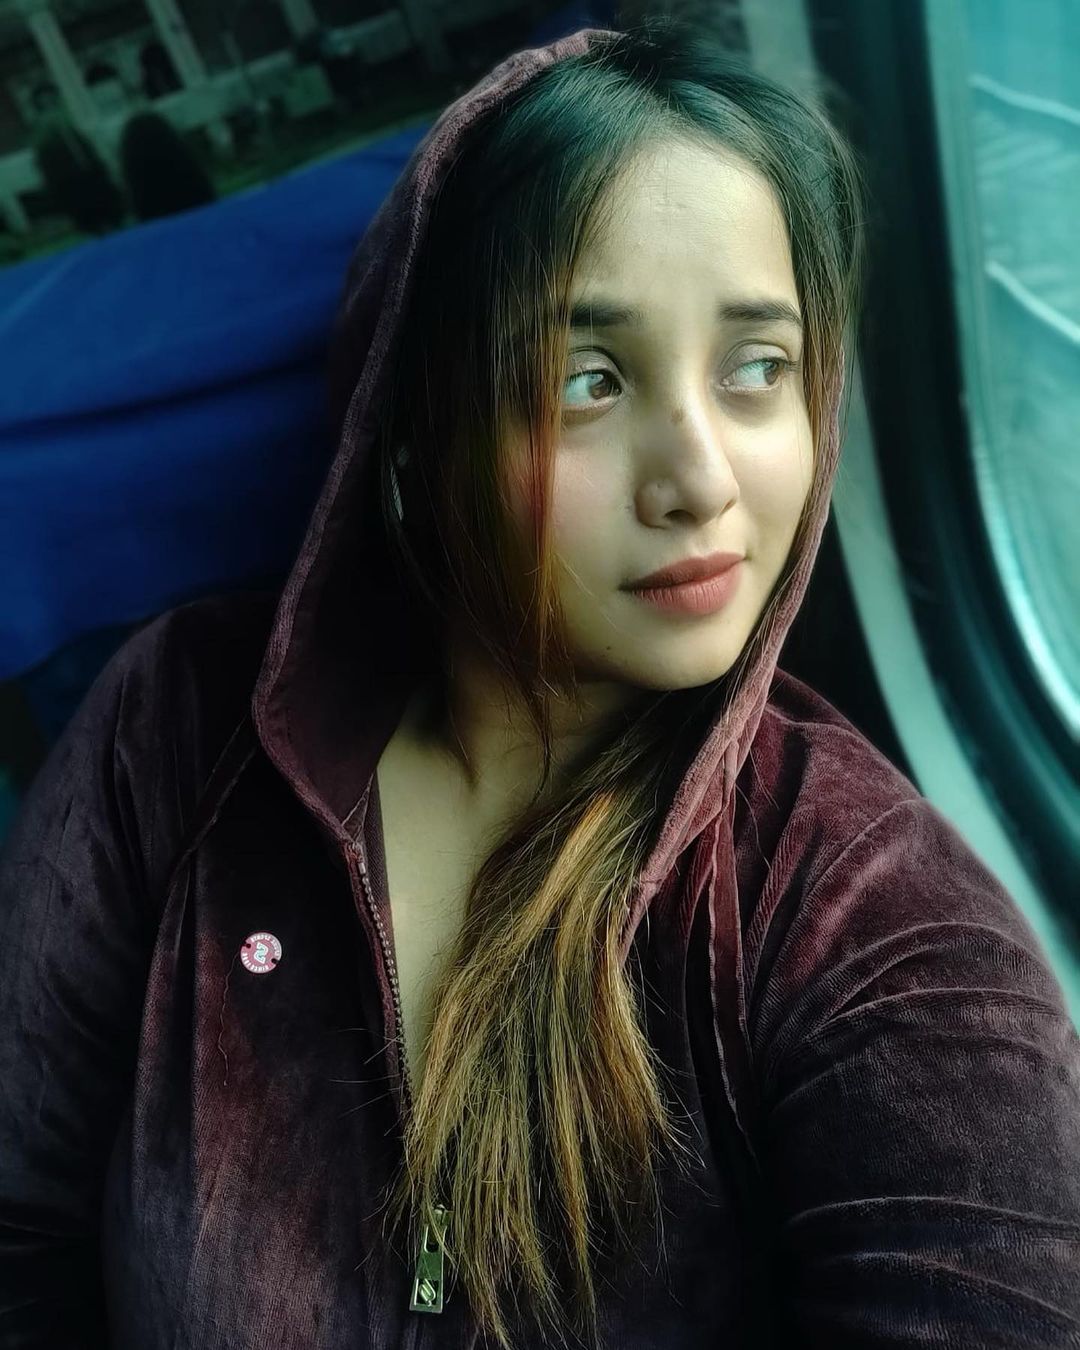 Rani Chatterjee shares her glamorous beauty during train journey, see photos 6263